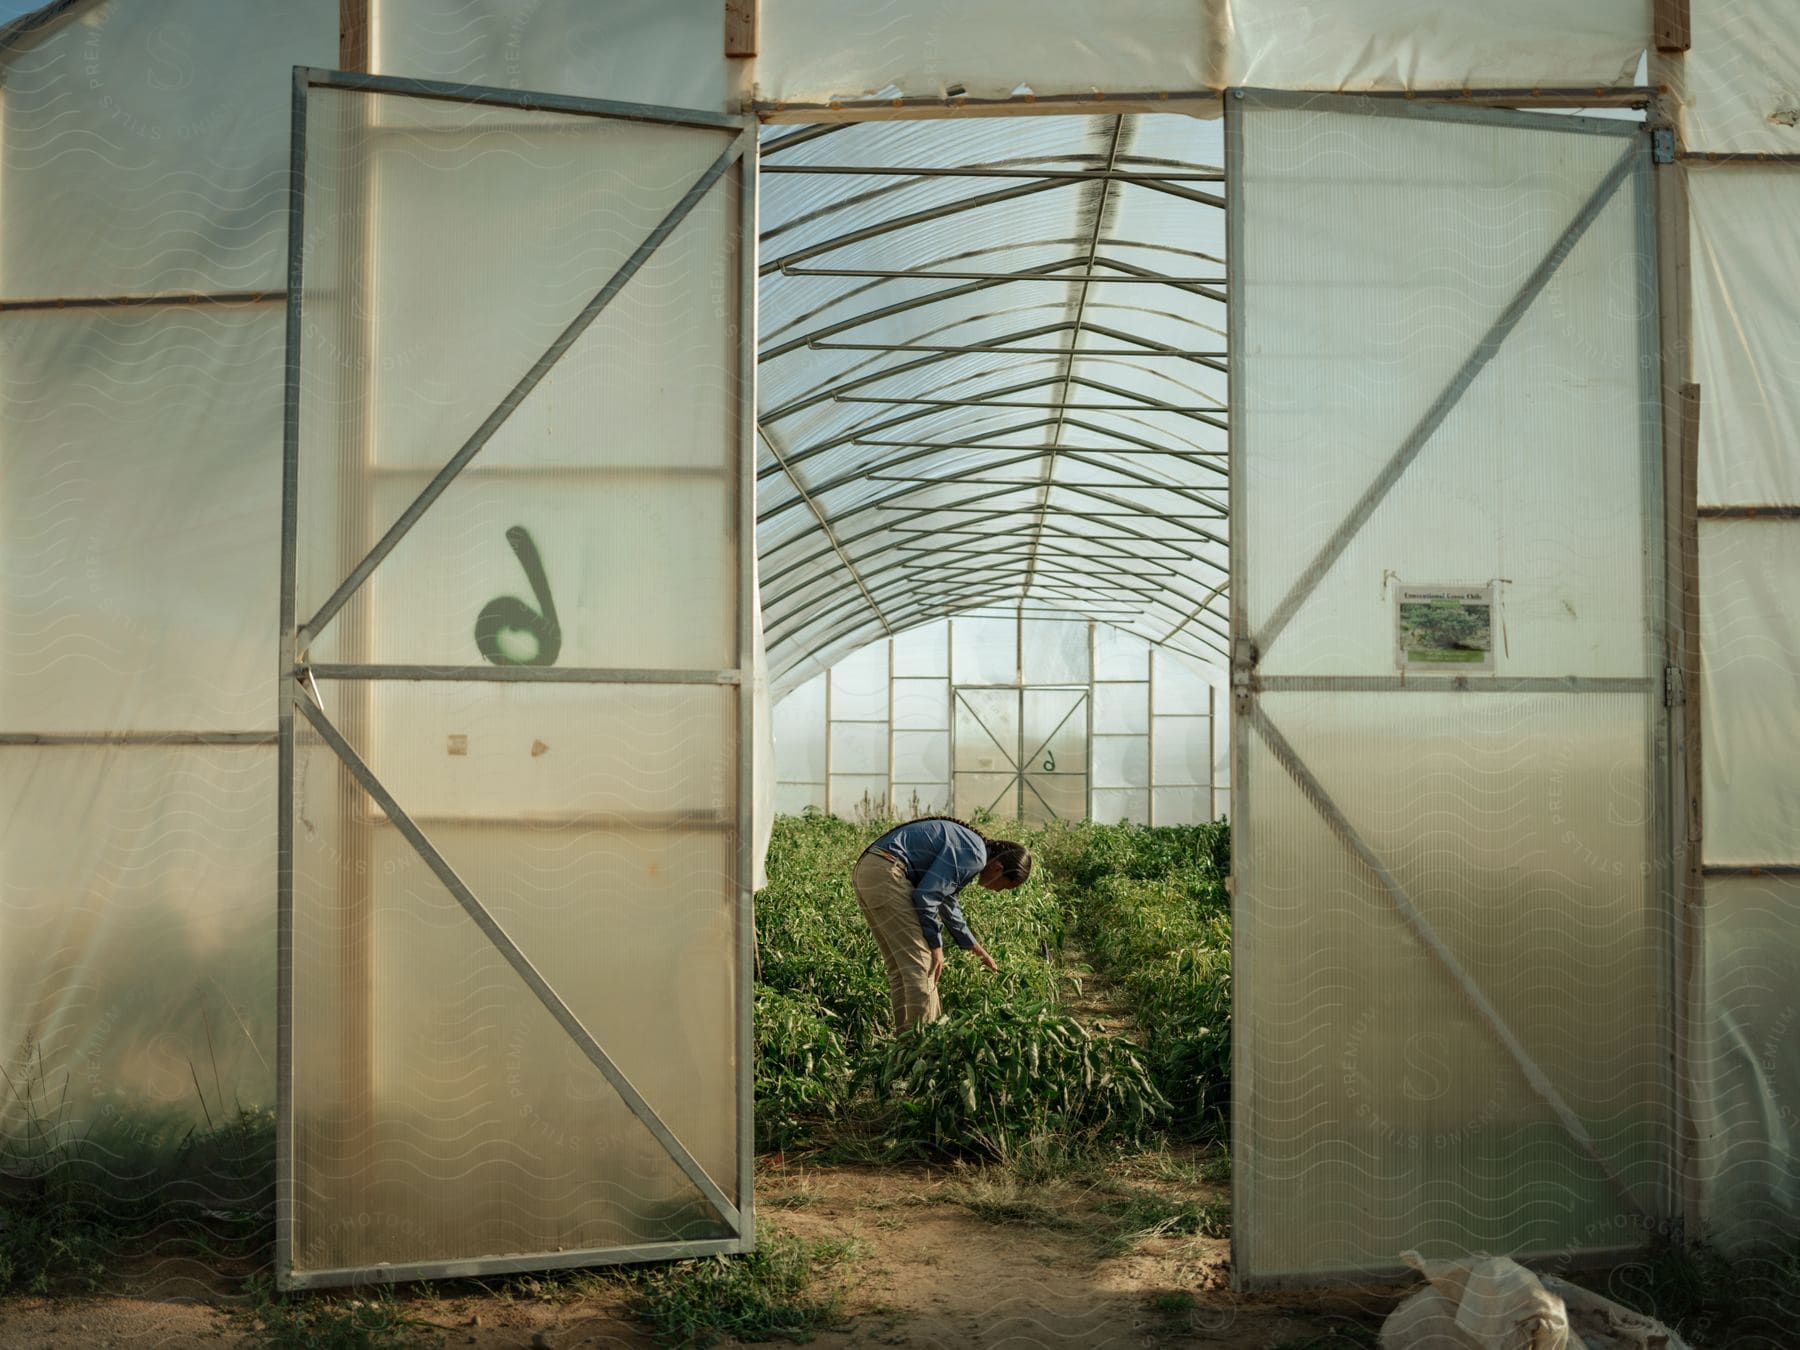 A gardener tending to plants in a greenhouse